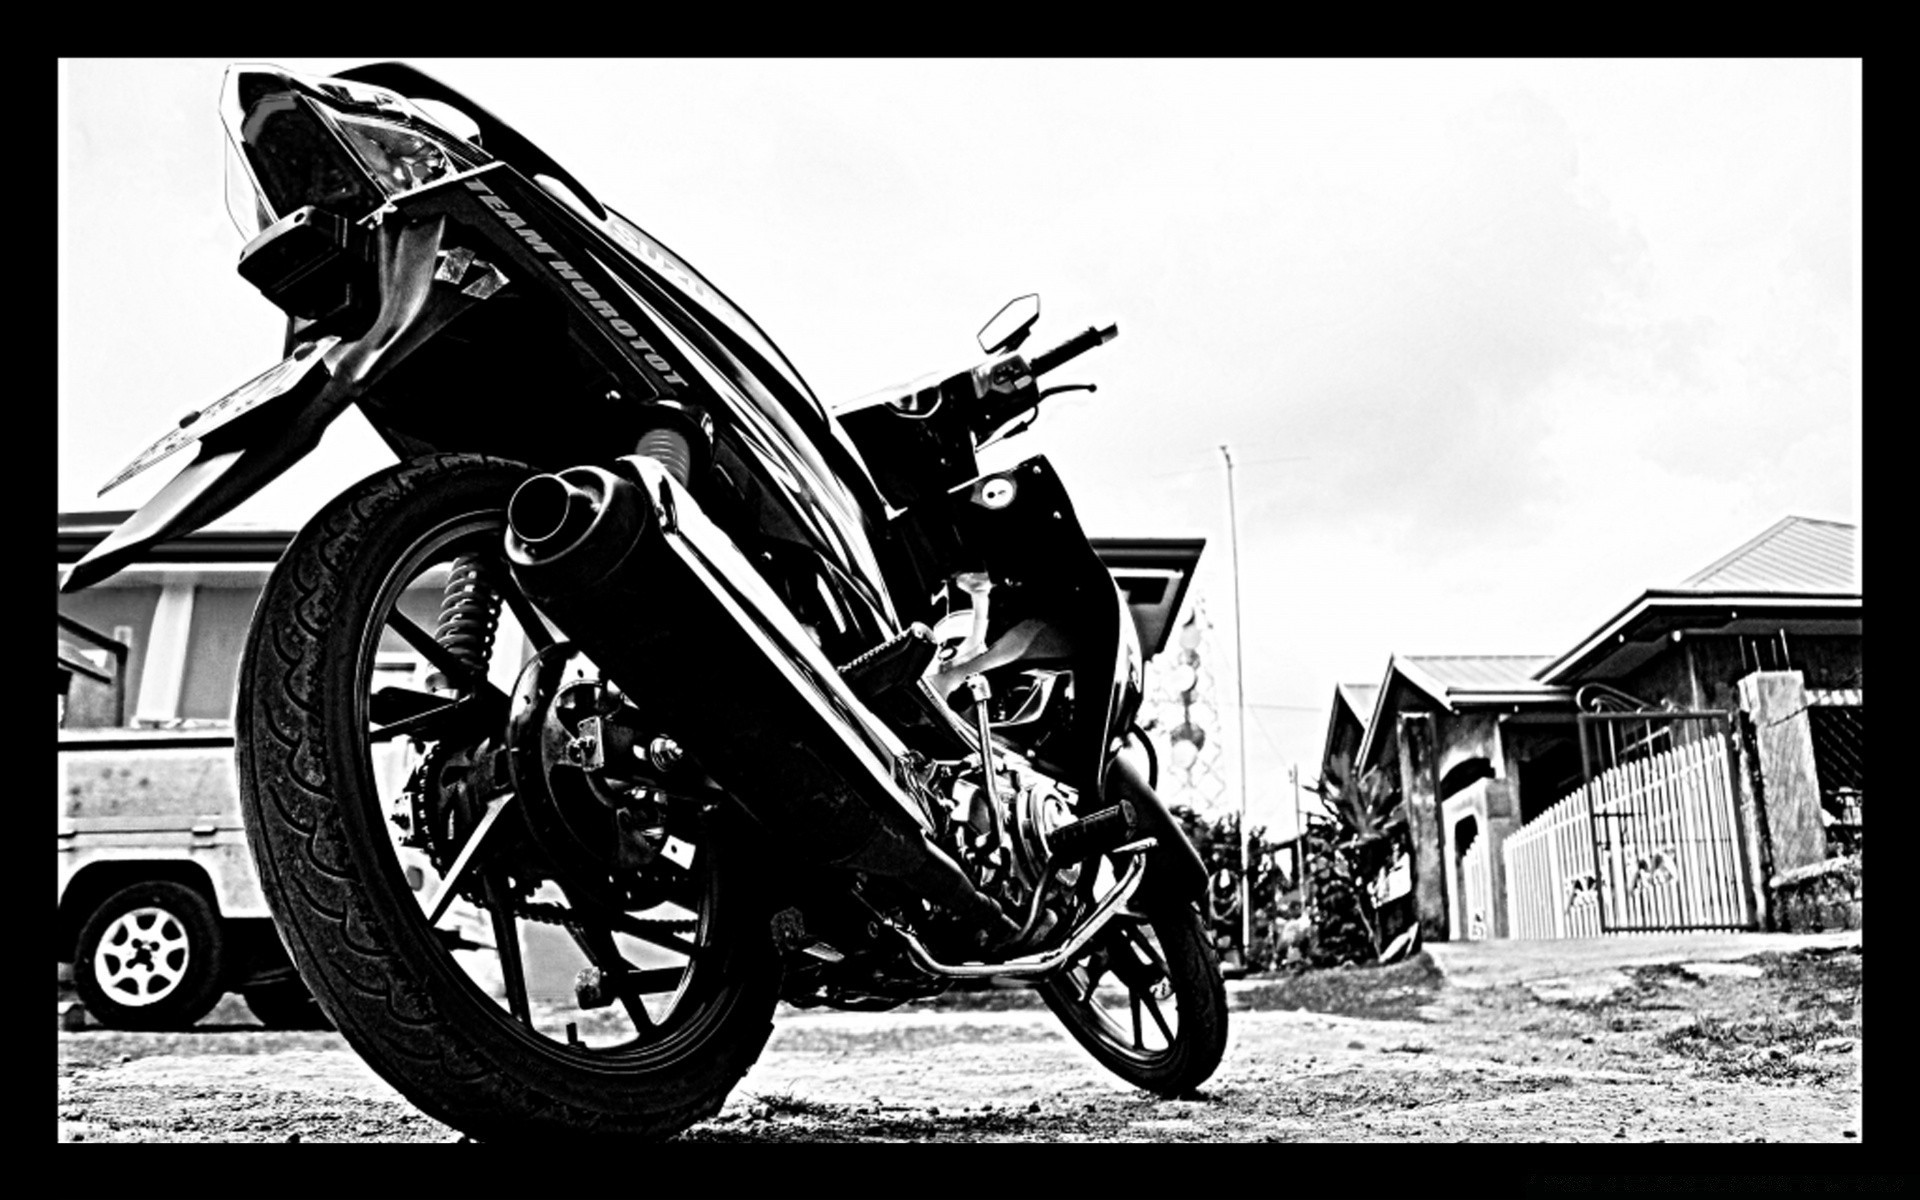 Black and white photo of a motorcycle taken from below wallpaper